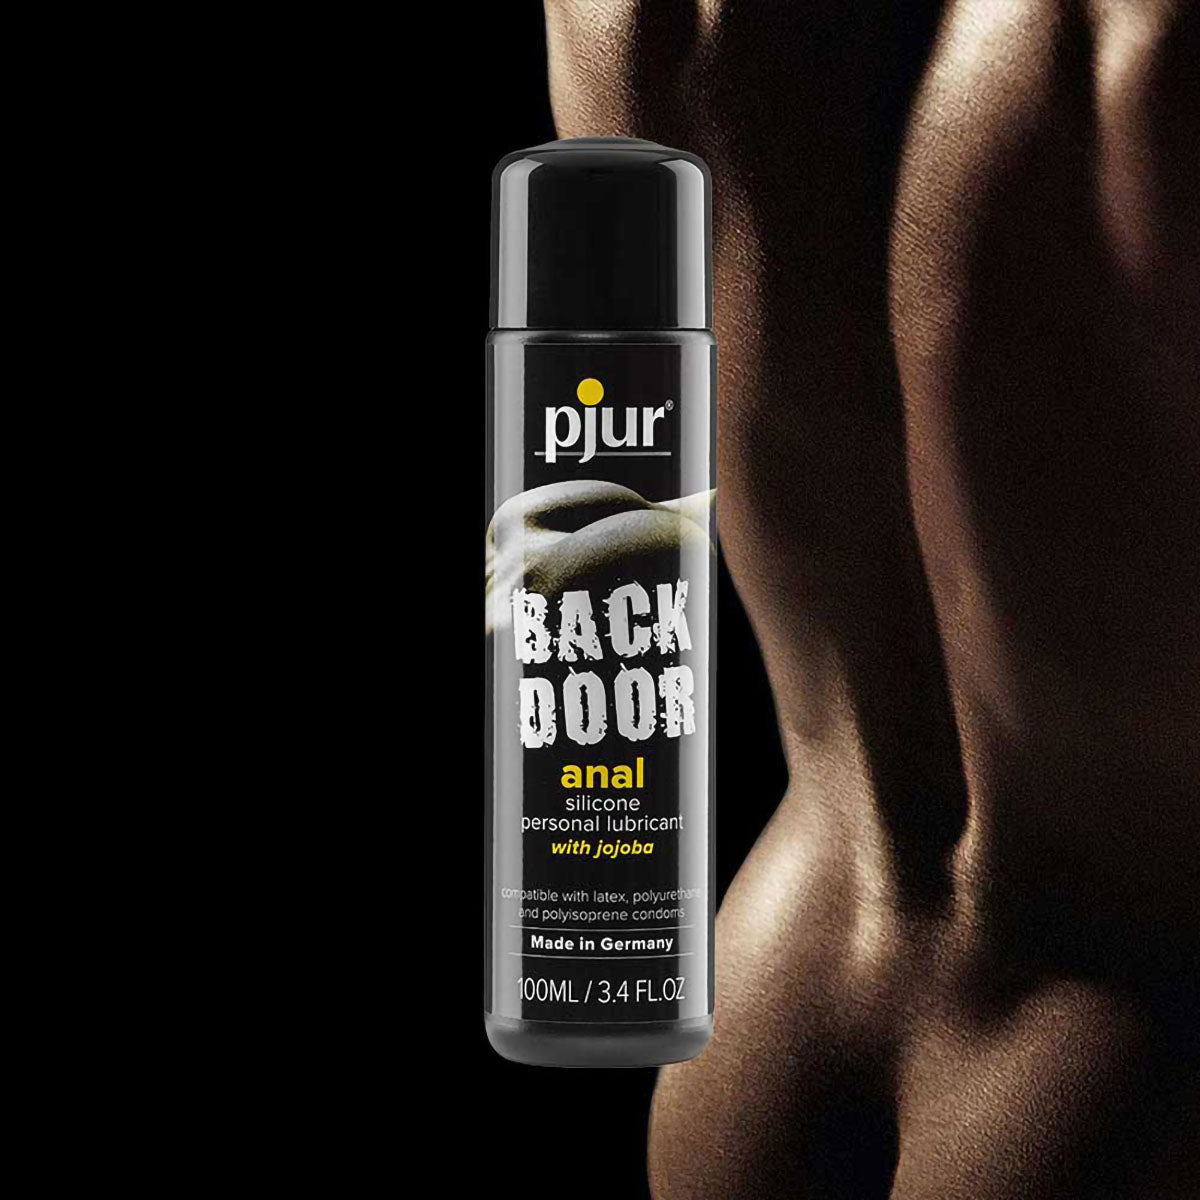 Pjur Back Door Relaxing Anal Glide Silicone Personal Lubricant Lube 3.4 oz